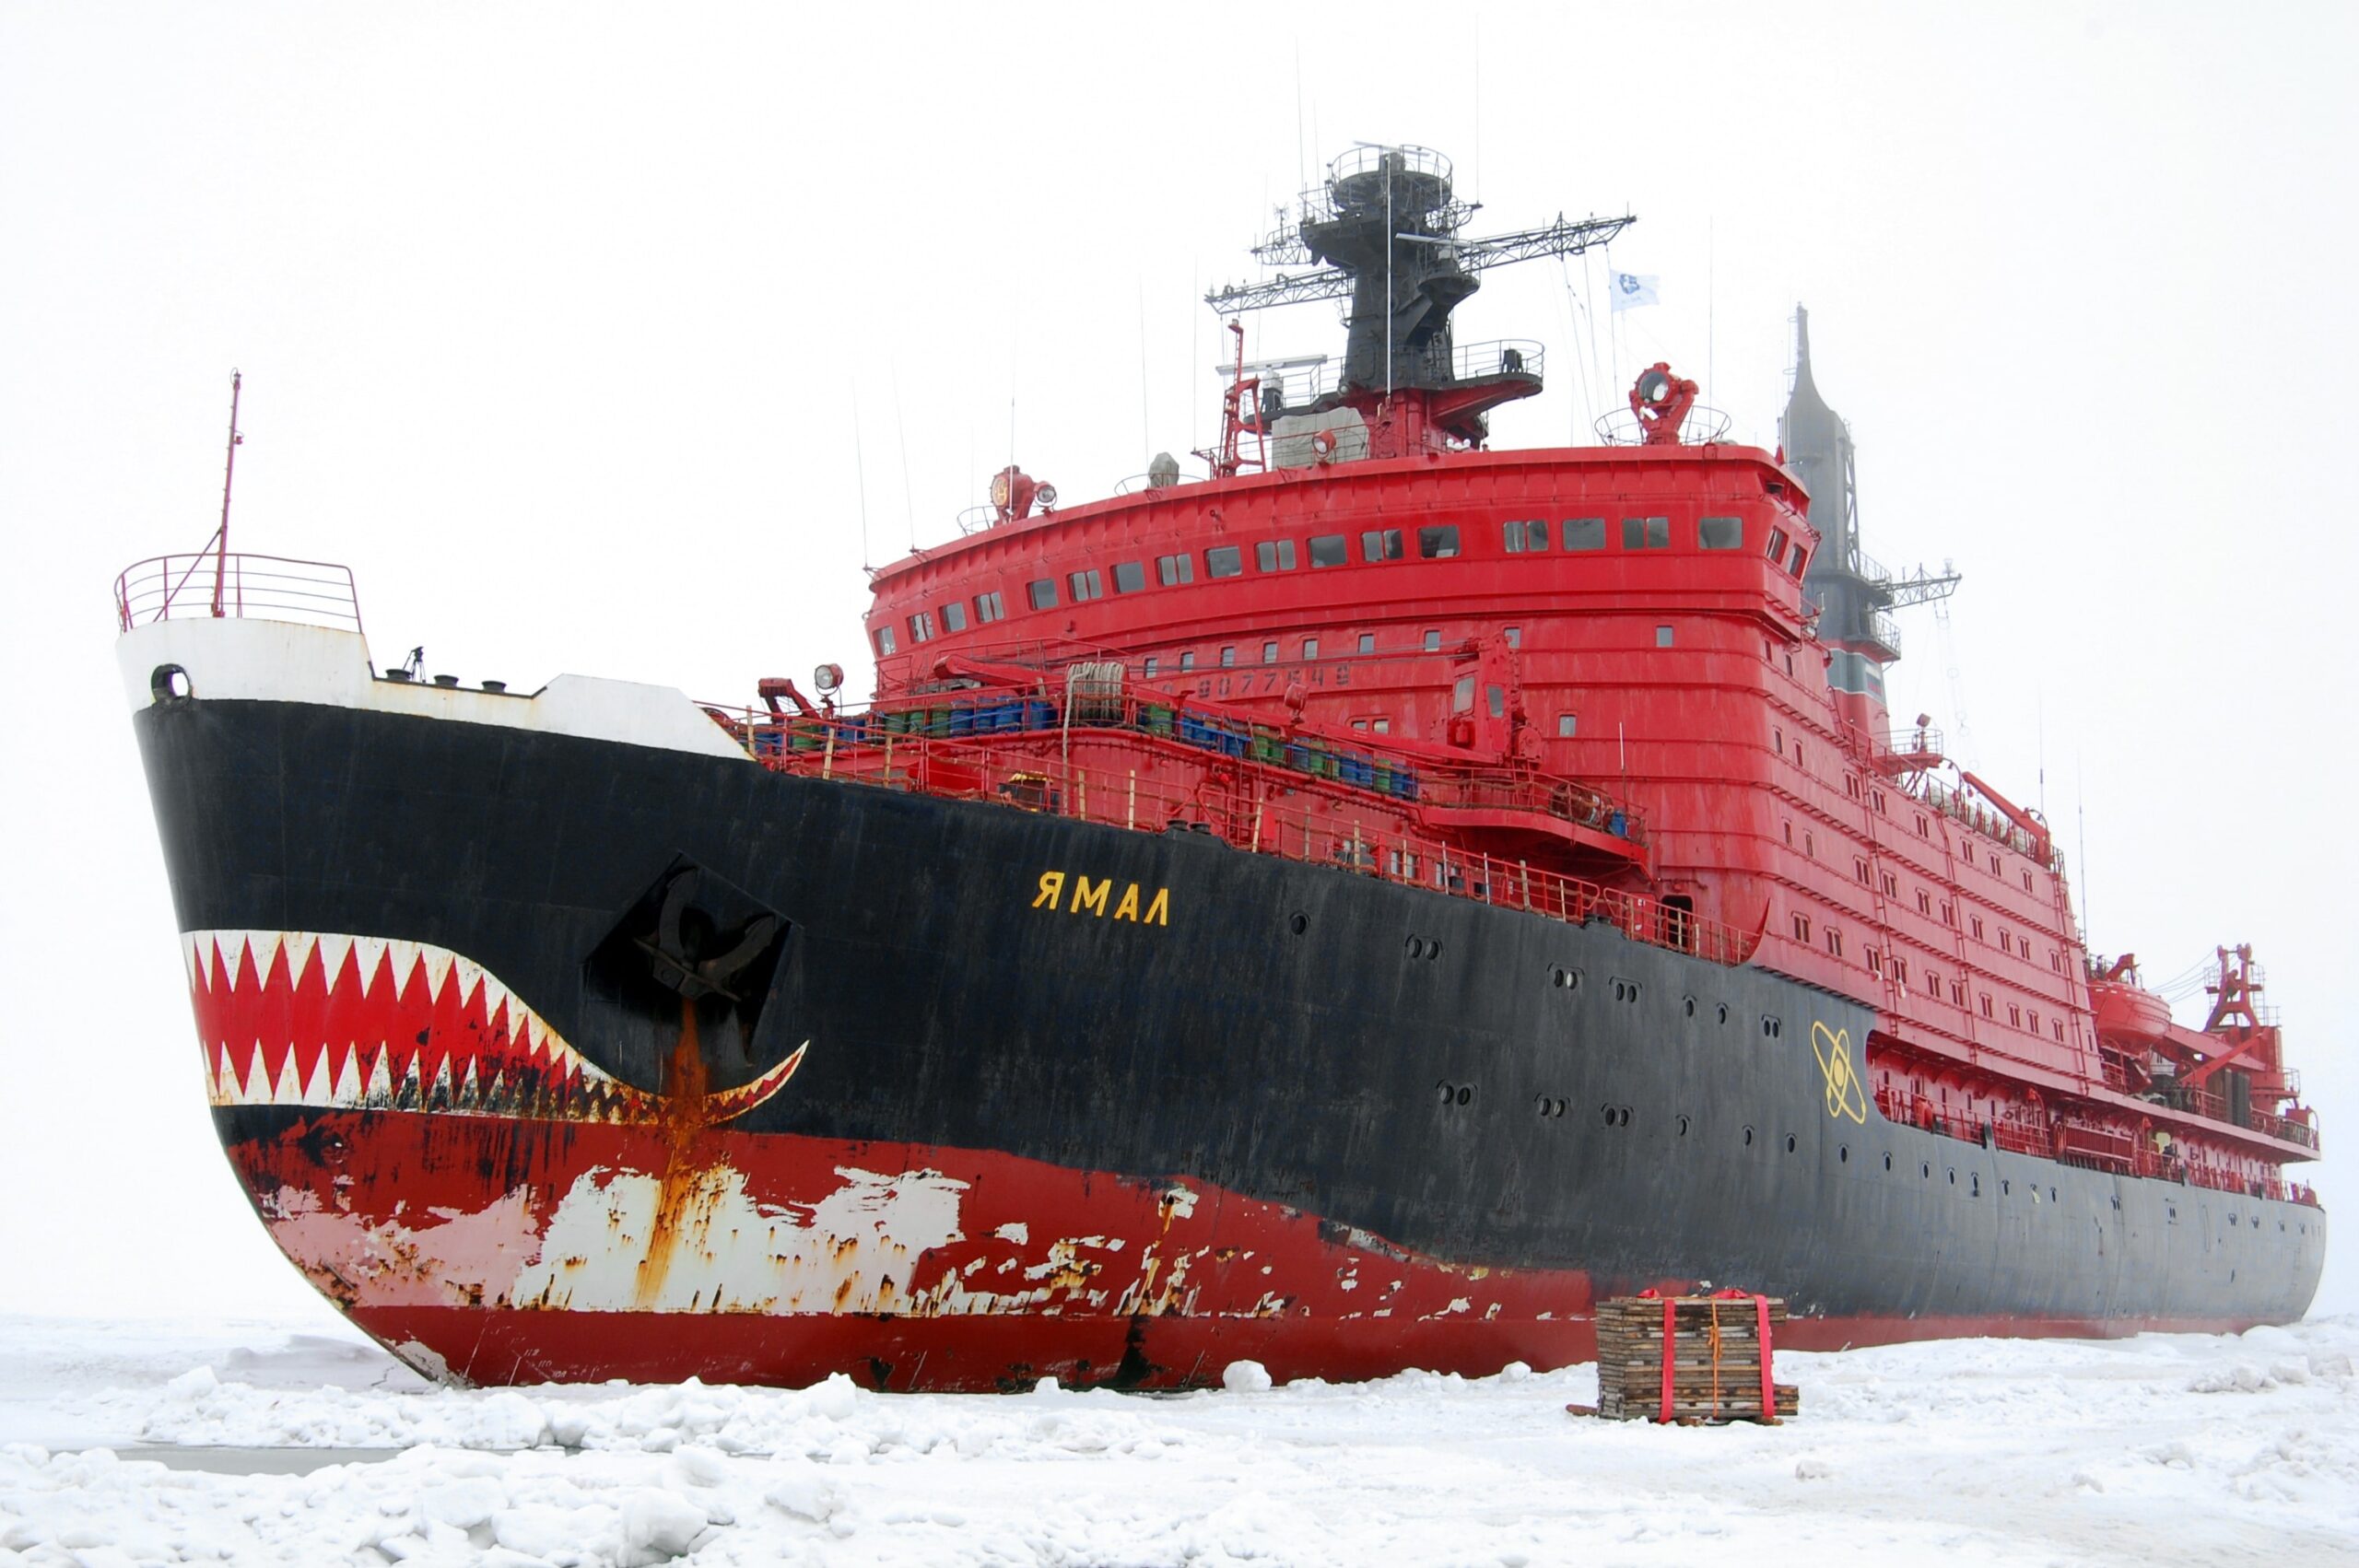 Massive red Russian nuclear icebreaker Yamal stands in Arctic sea ice. The ice-breaking ship has a mouth design on its front.